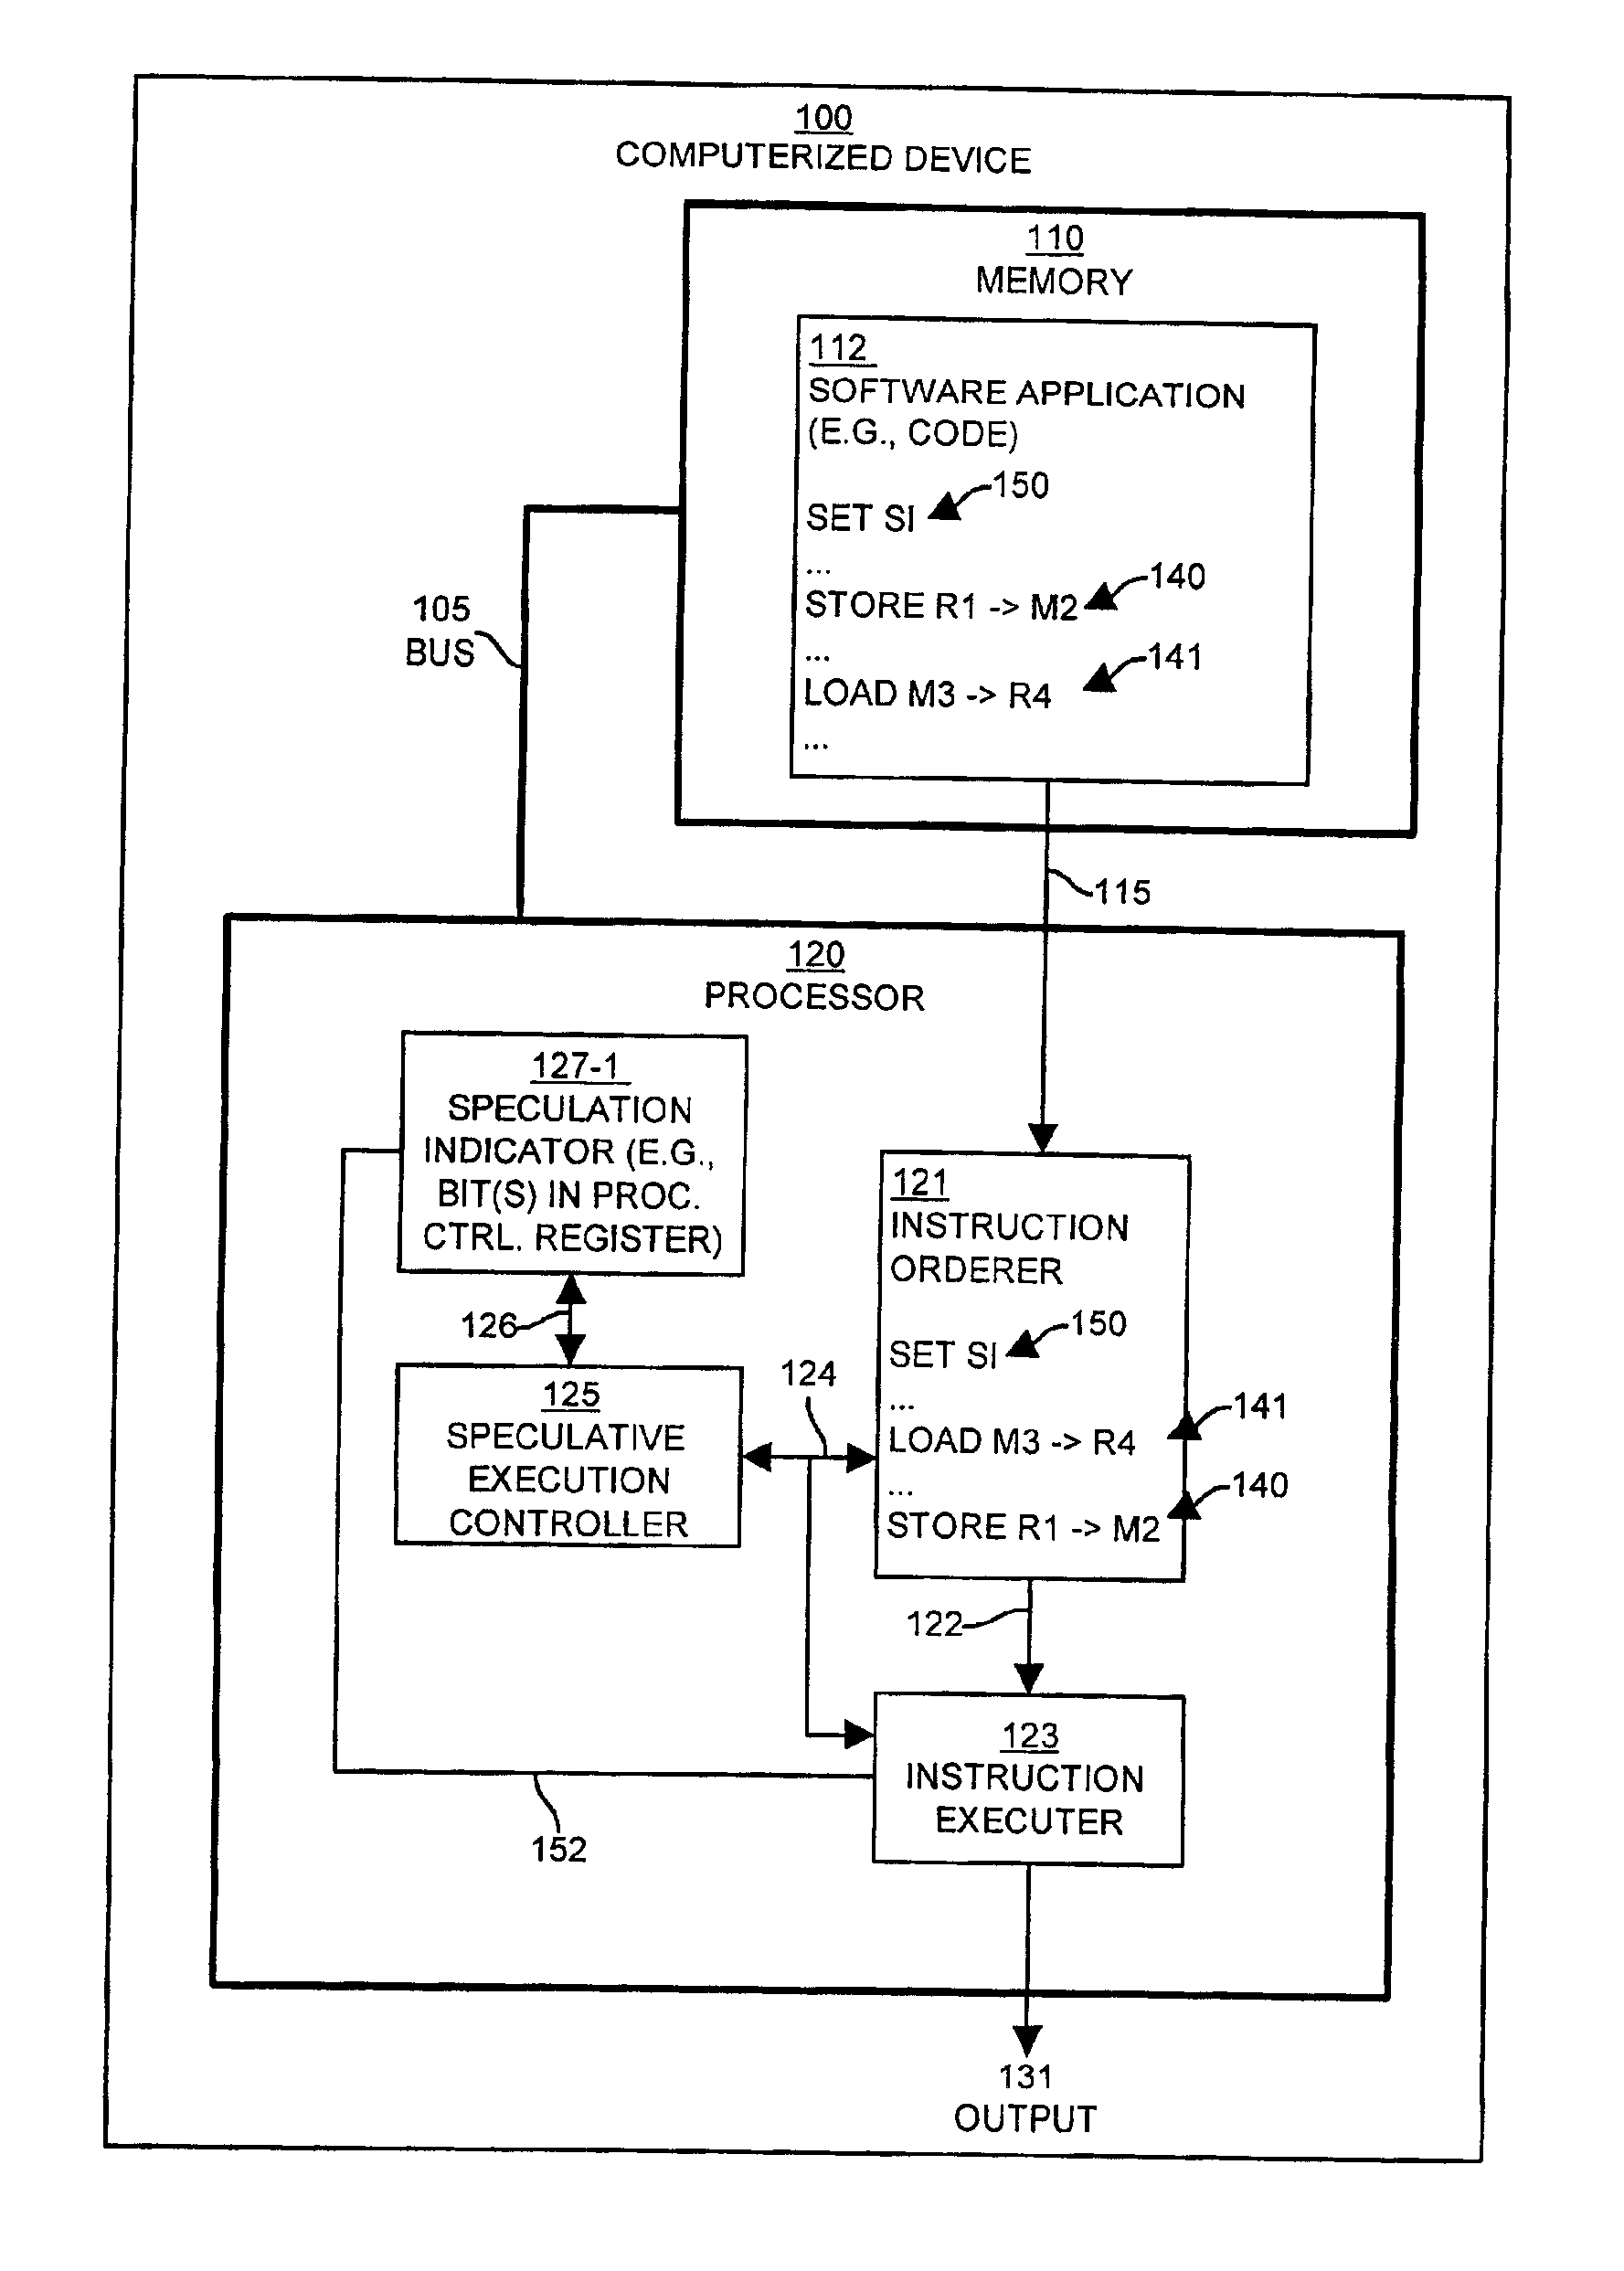 Speculative execution control with programmable indicator and deactivation of multiaccess recovery mechanism